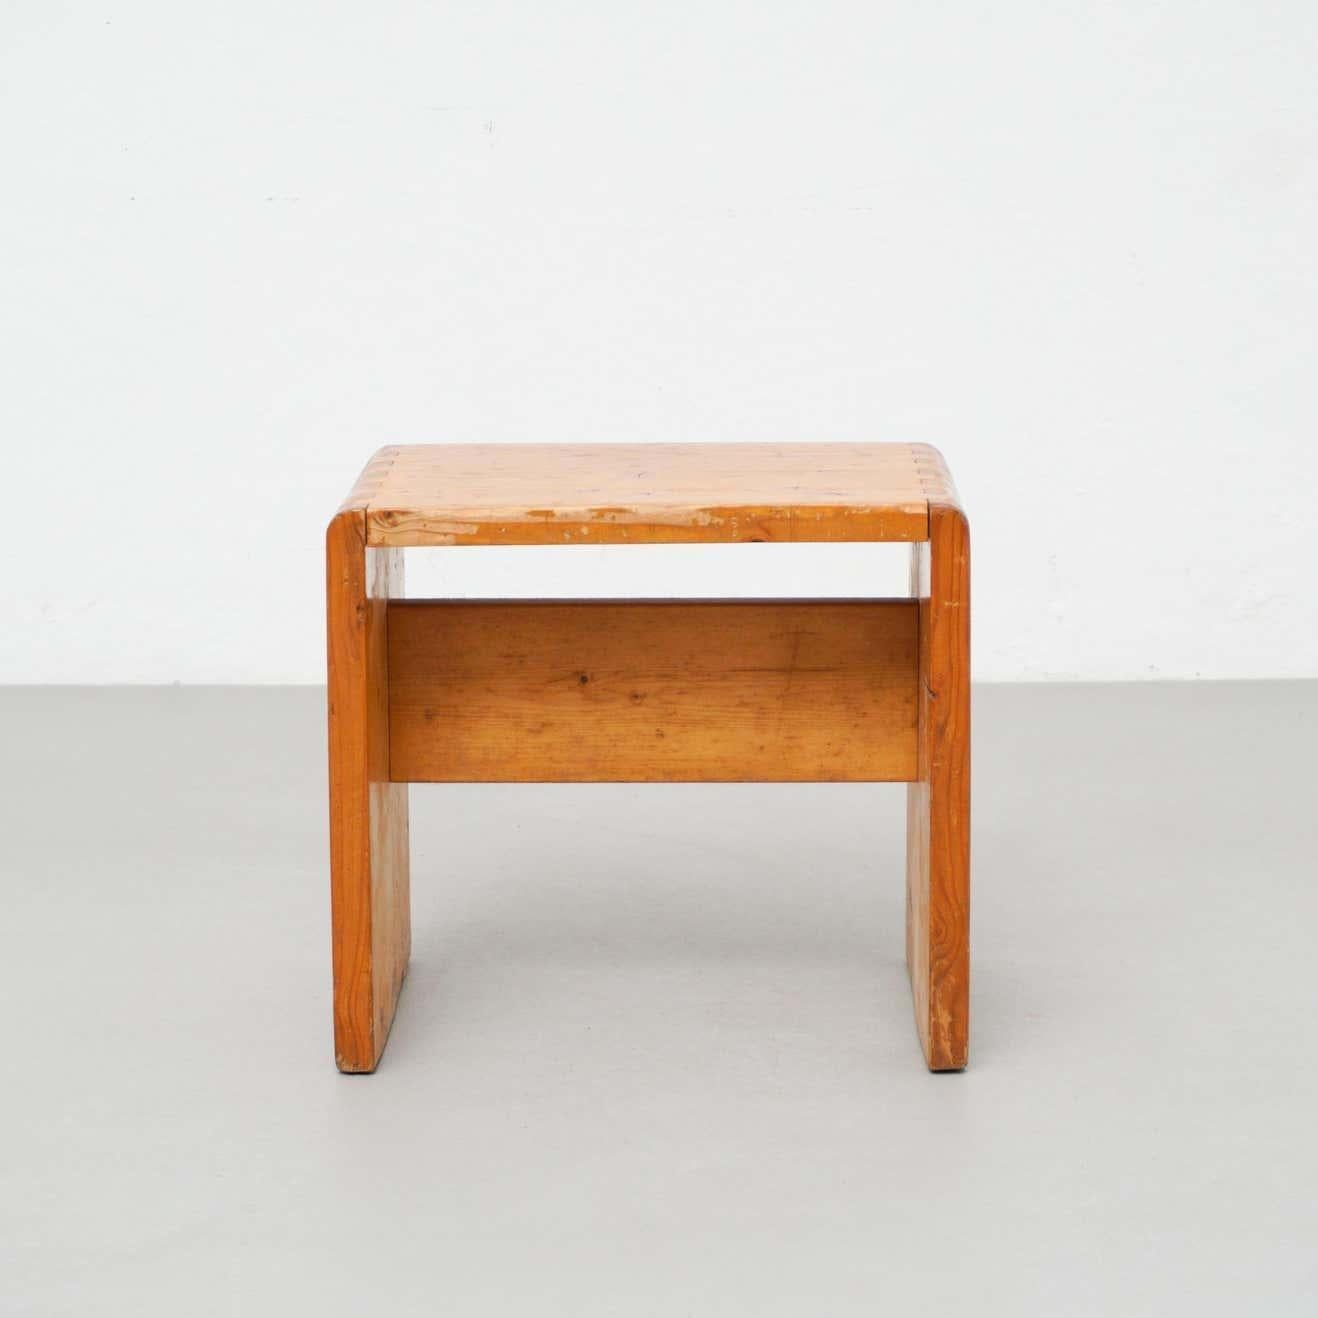 Stool designed by Charlotte Perriand for Les Arcs ski Resort, circa 1960, manufactured in France.
Pinewood.

In nice condition, with wear consistent with age and use, preserving a beautiful patina.

Charlotte Perriand (1903-1999). She was born in